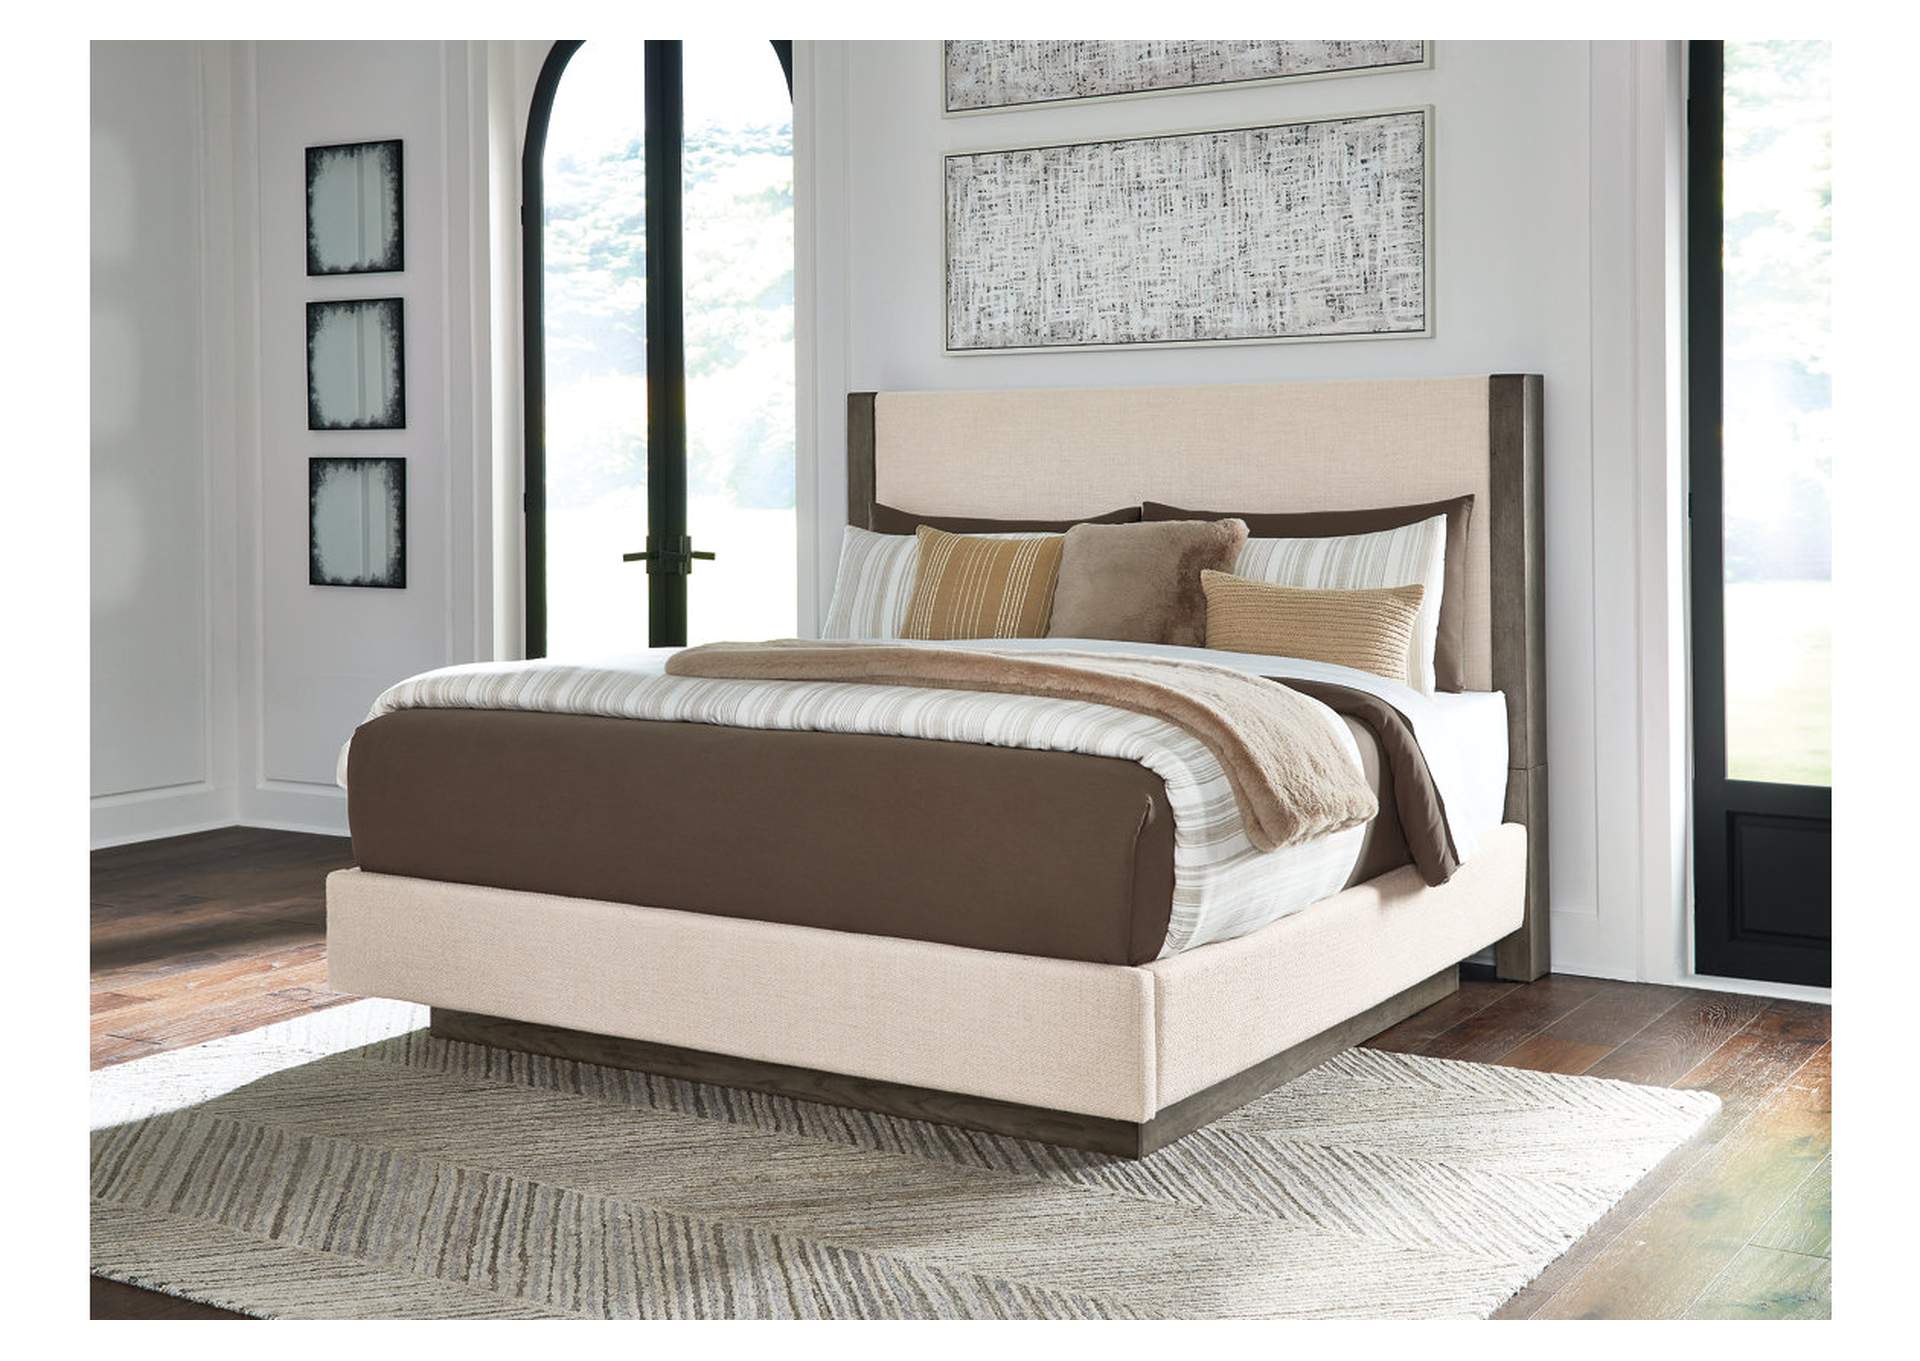 Anibecca California King Upholstered Bed,Benchcraft